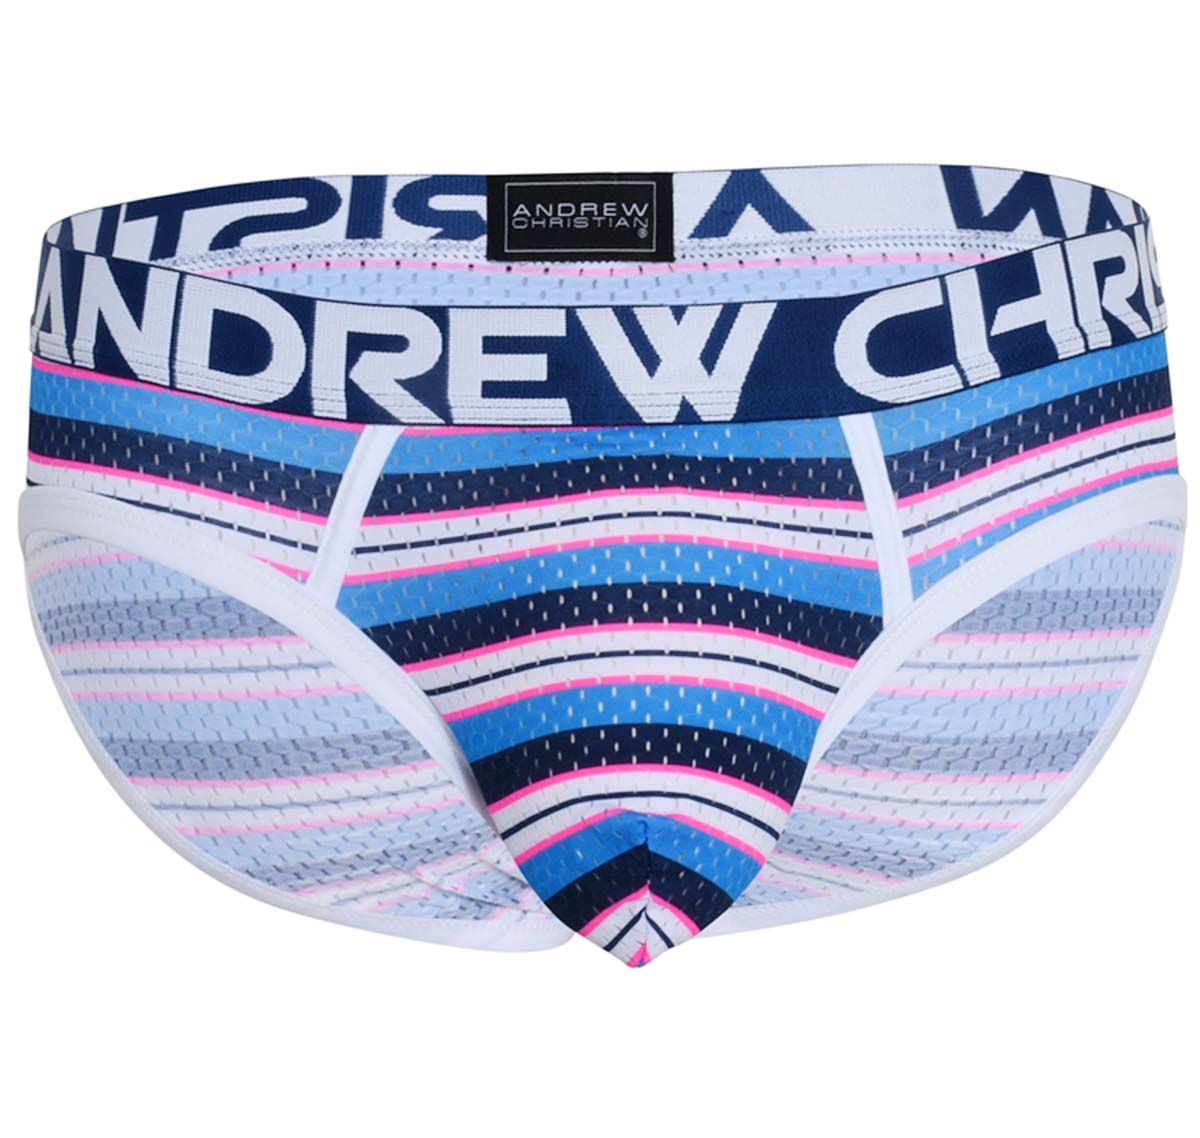 Andrew Christian Brief NEWPORT MESH BRIEF w/ ALMOST NAKED 92366, multicolor